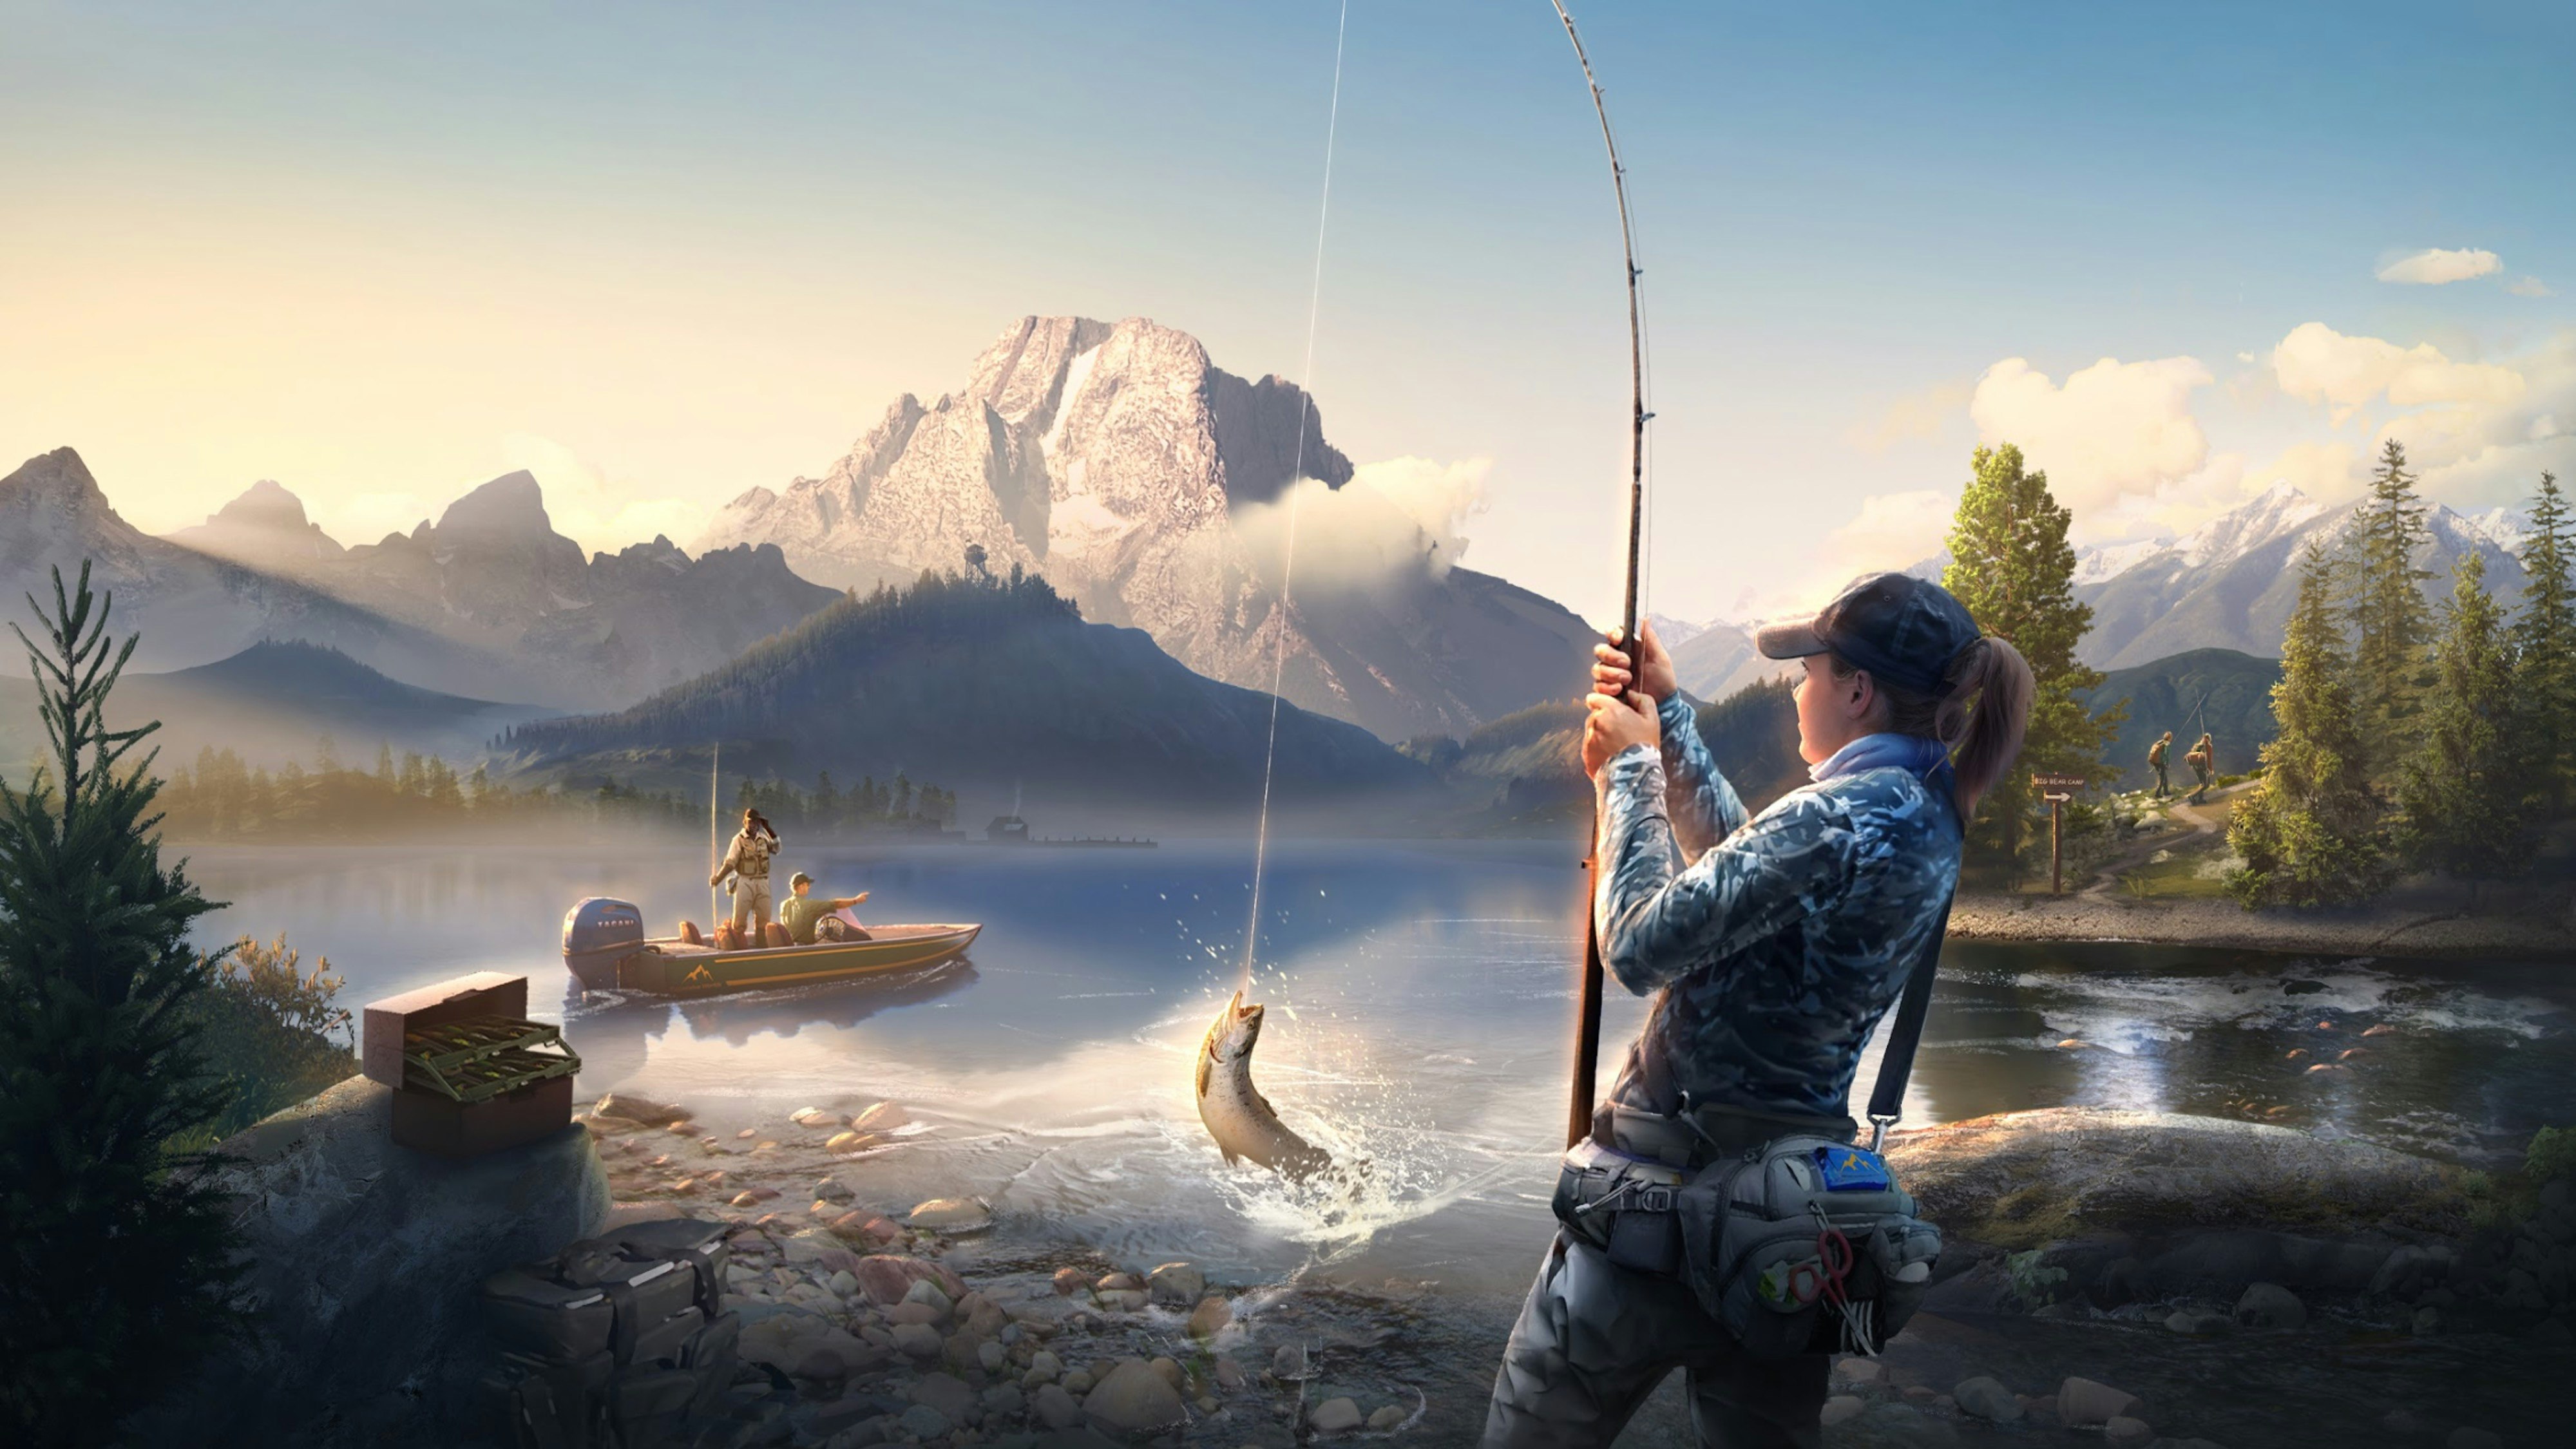 Concept art depicting the lakeside scenescape of Golden Ridge Reserve, a female angler reeling in a large catch in the foreground, two friends fishing on a boat on the lake, and two individuals exploring the reserve across the bank on the right.